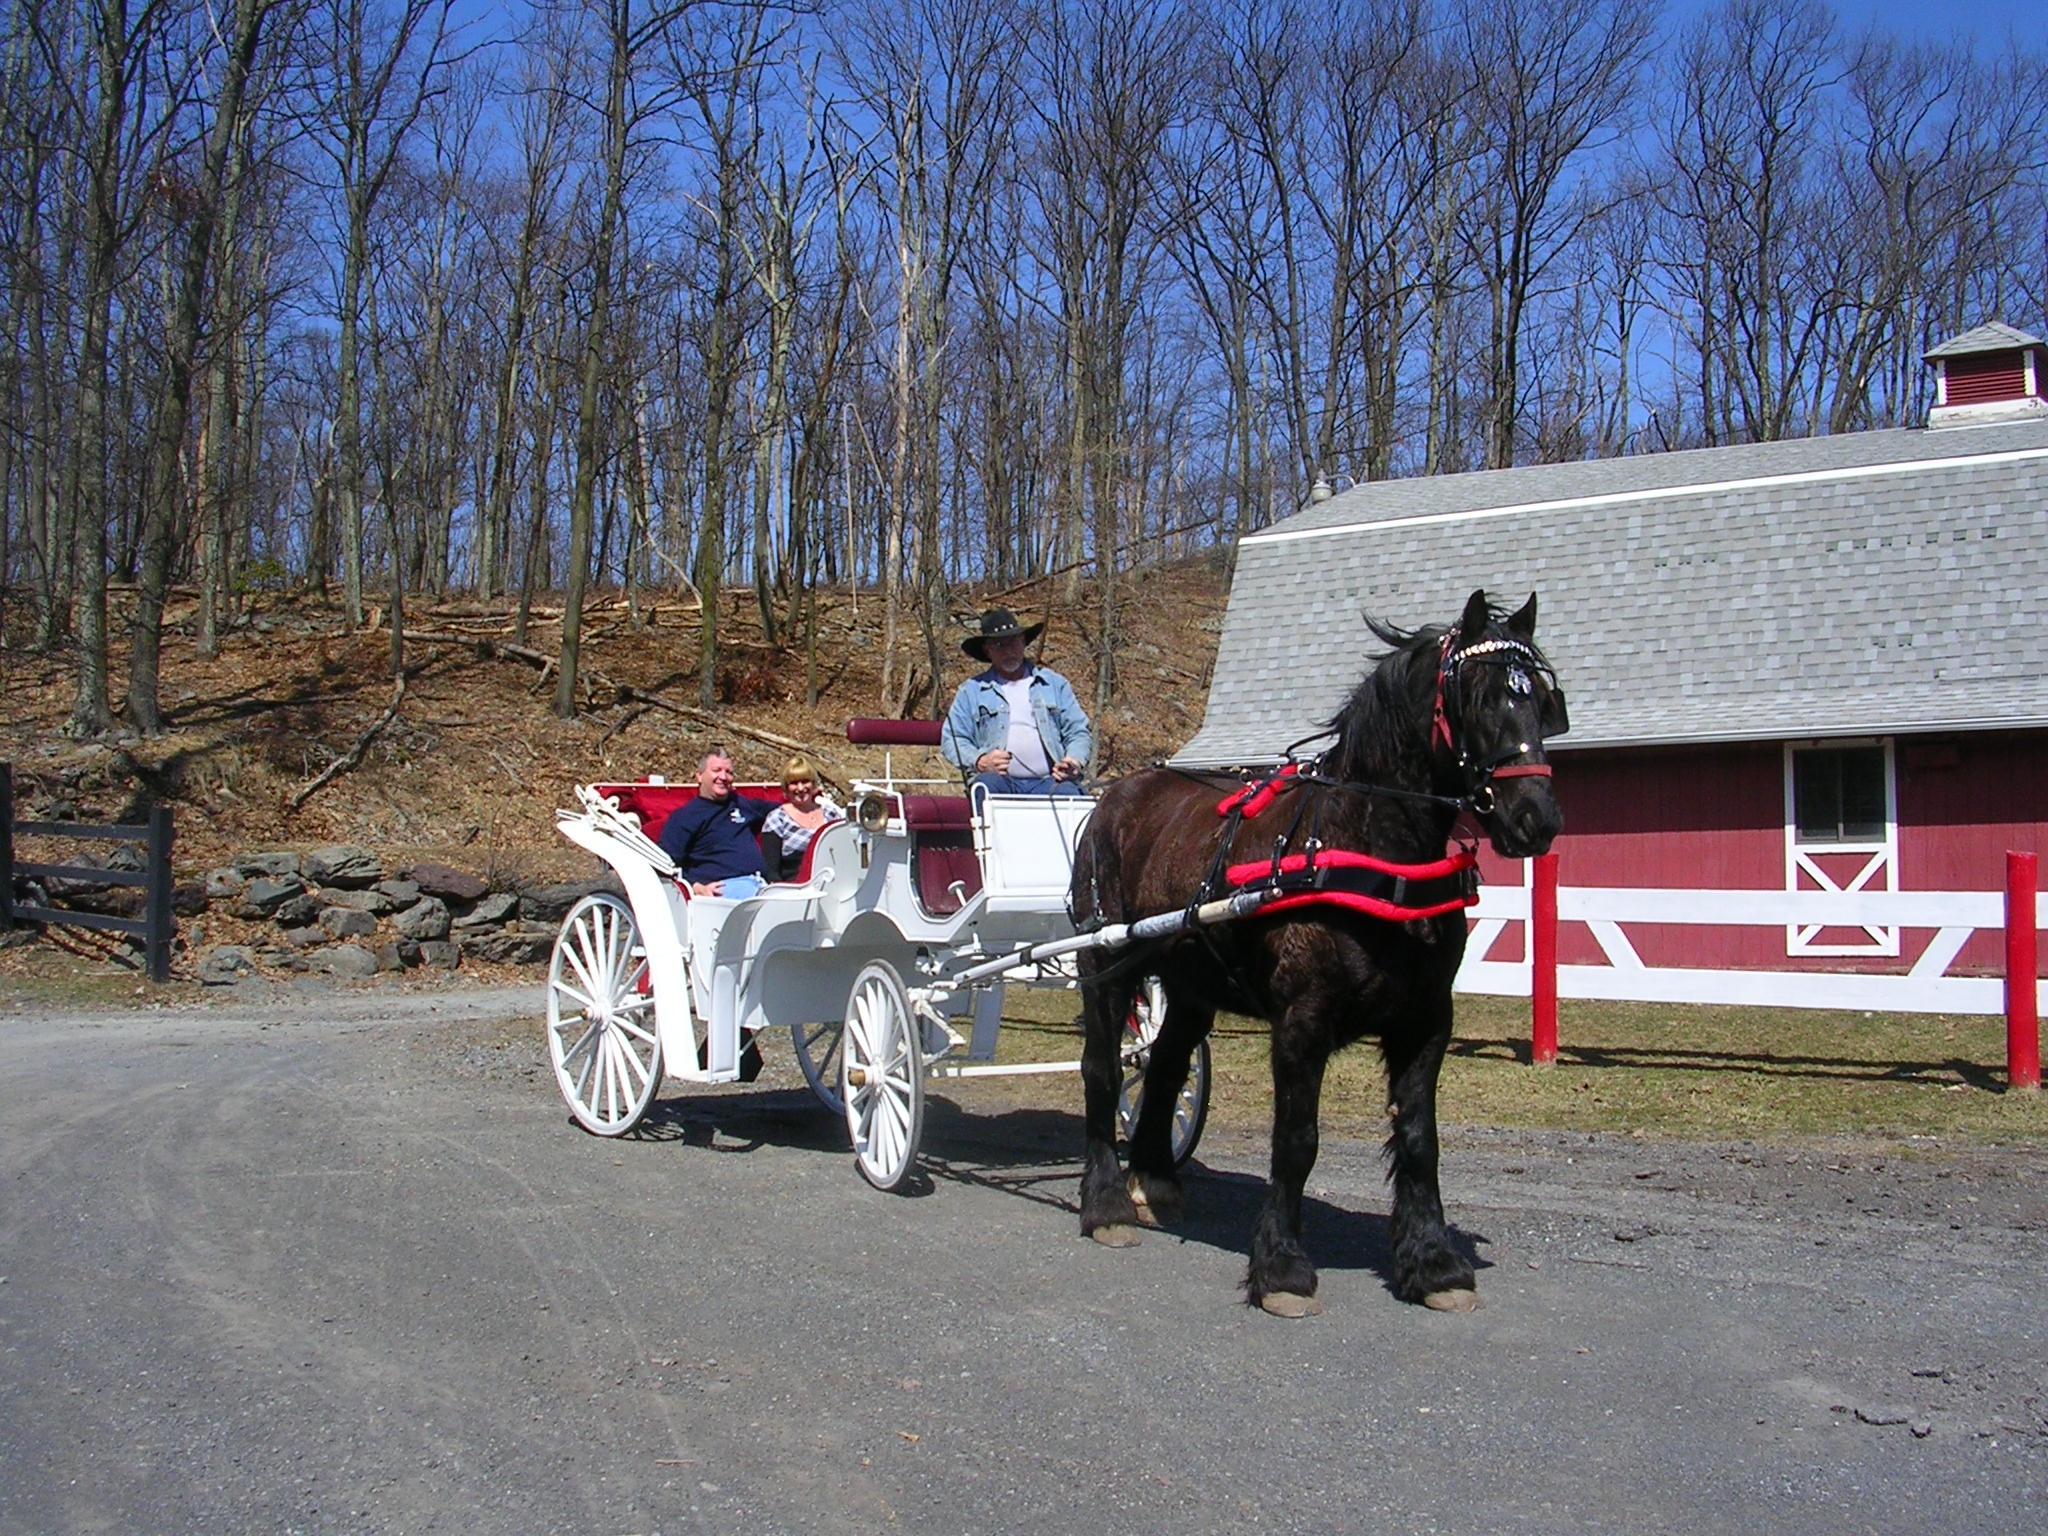 Happy Trails Riding Stables in the Pocono Mountains Hamlin western and english style saddles, trail rides, carriage, sleigh, and hay rides, boarding and horse sales